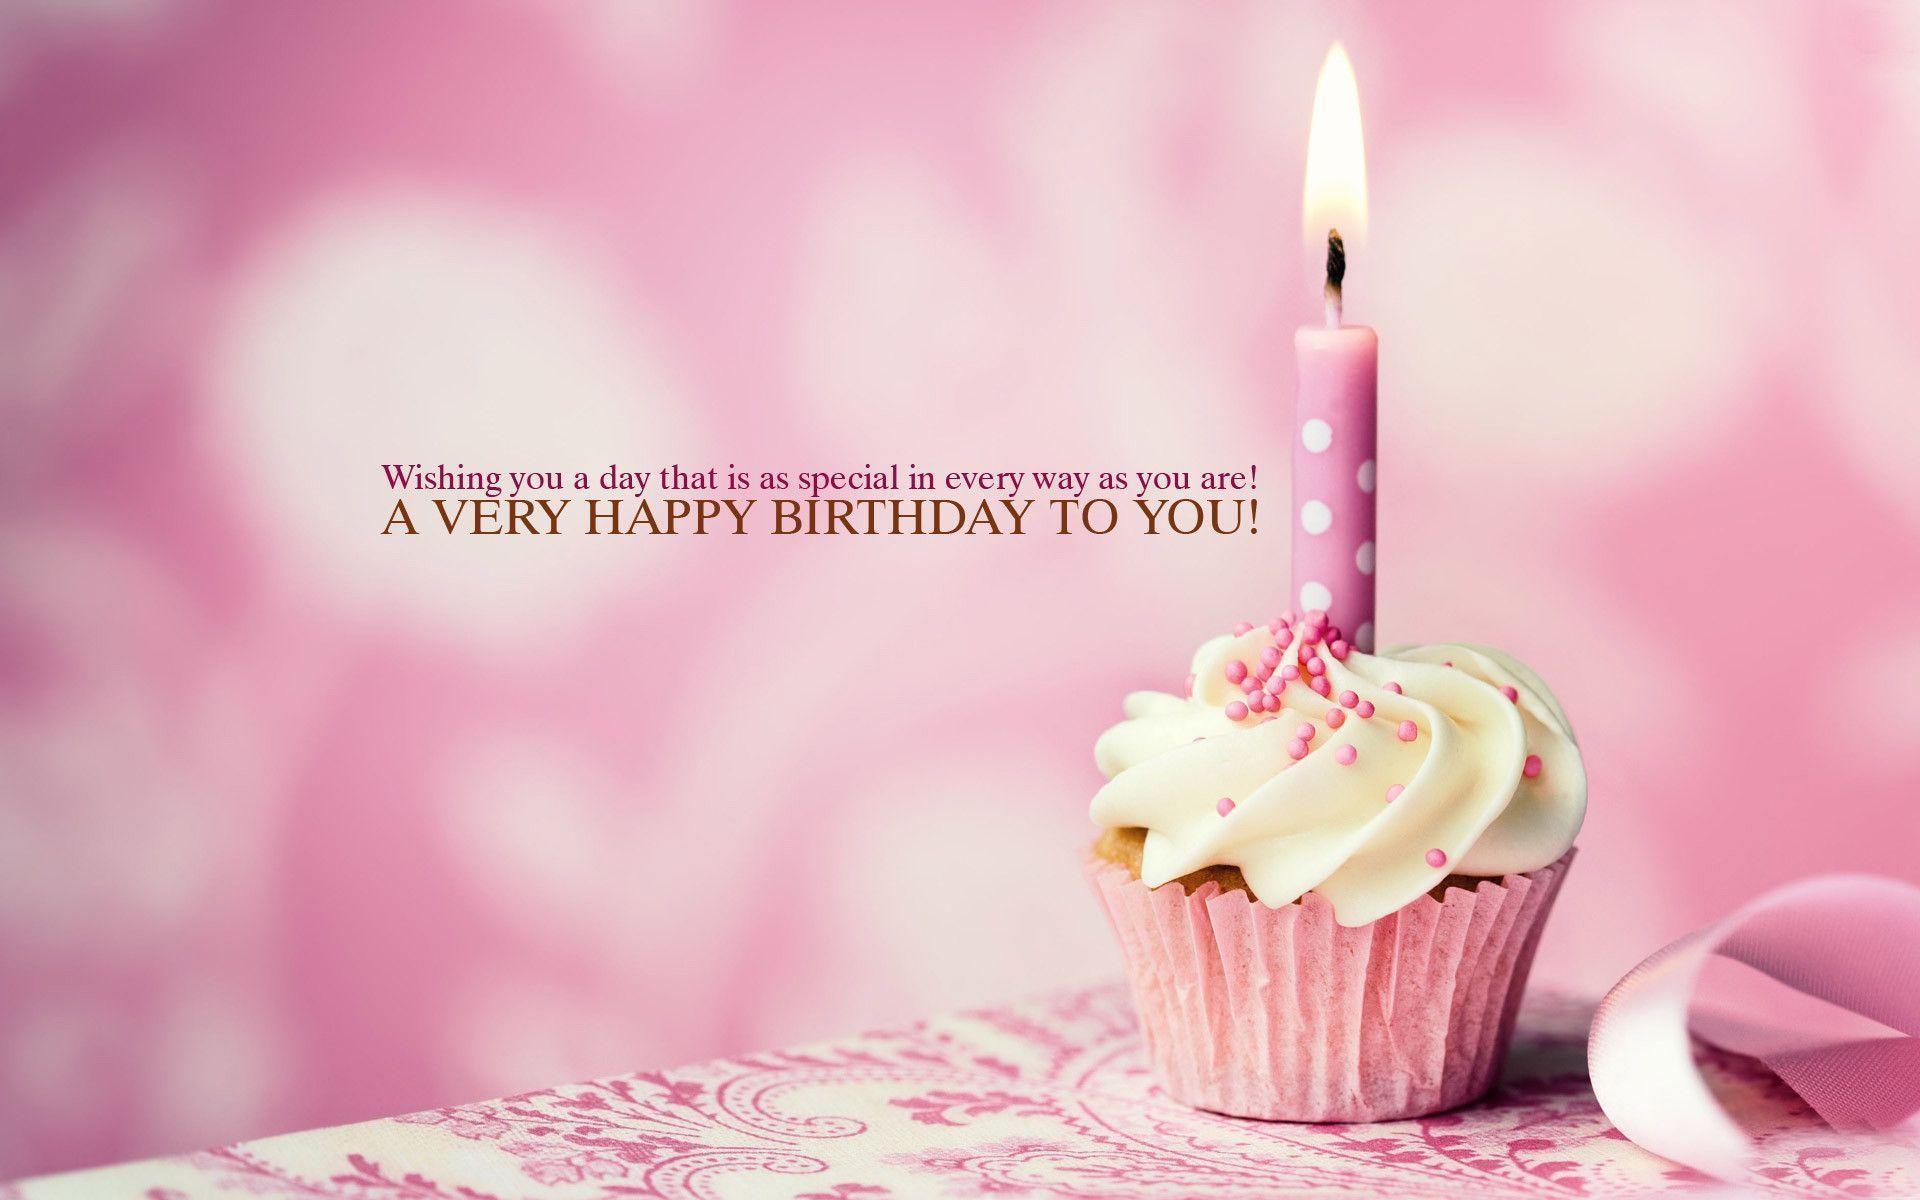 Birthday Cake Wallpapers download 